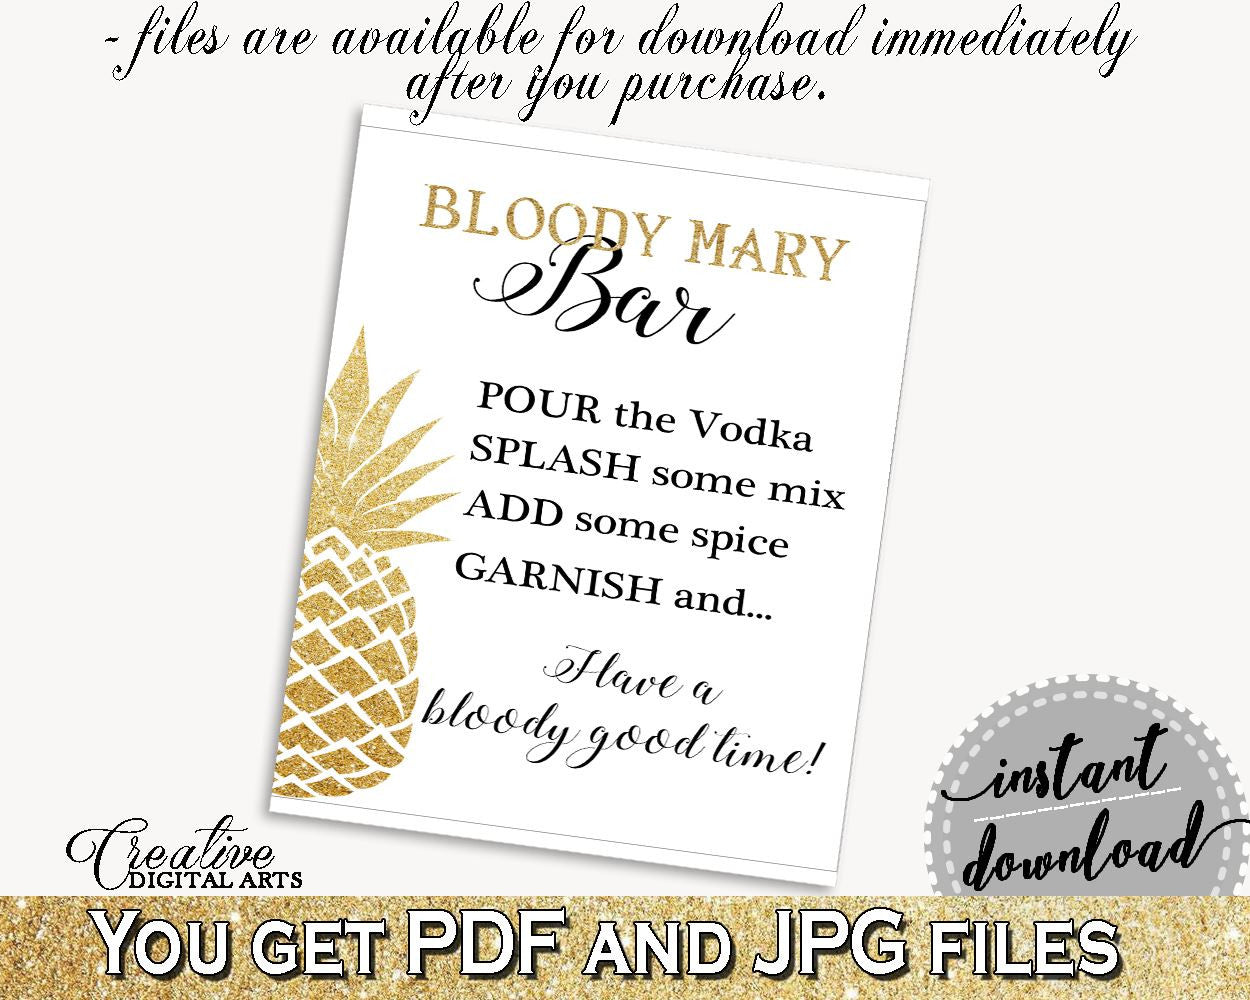 Bloody Mary Bar Sign Bridal Shower Bloody Mary Bar Sign Pineapple Bridal Shower Bloody Mary Bar Sign Bridal Shower Pineapple Bloody 86GZU - Digital Product